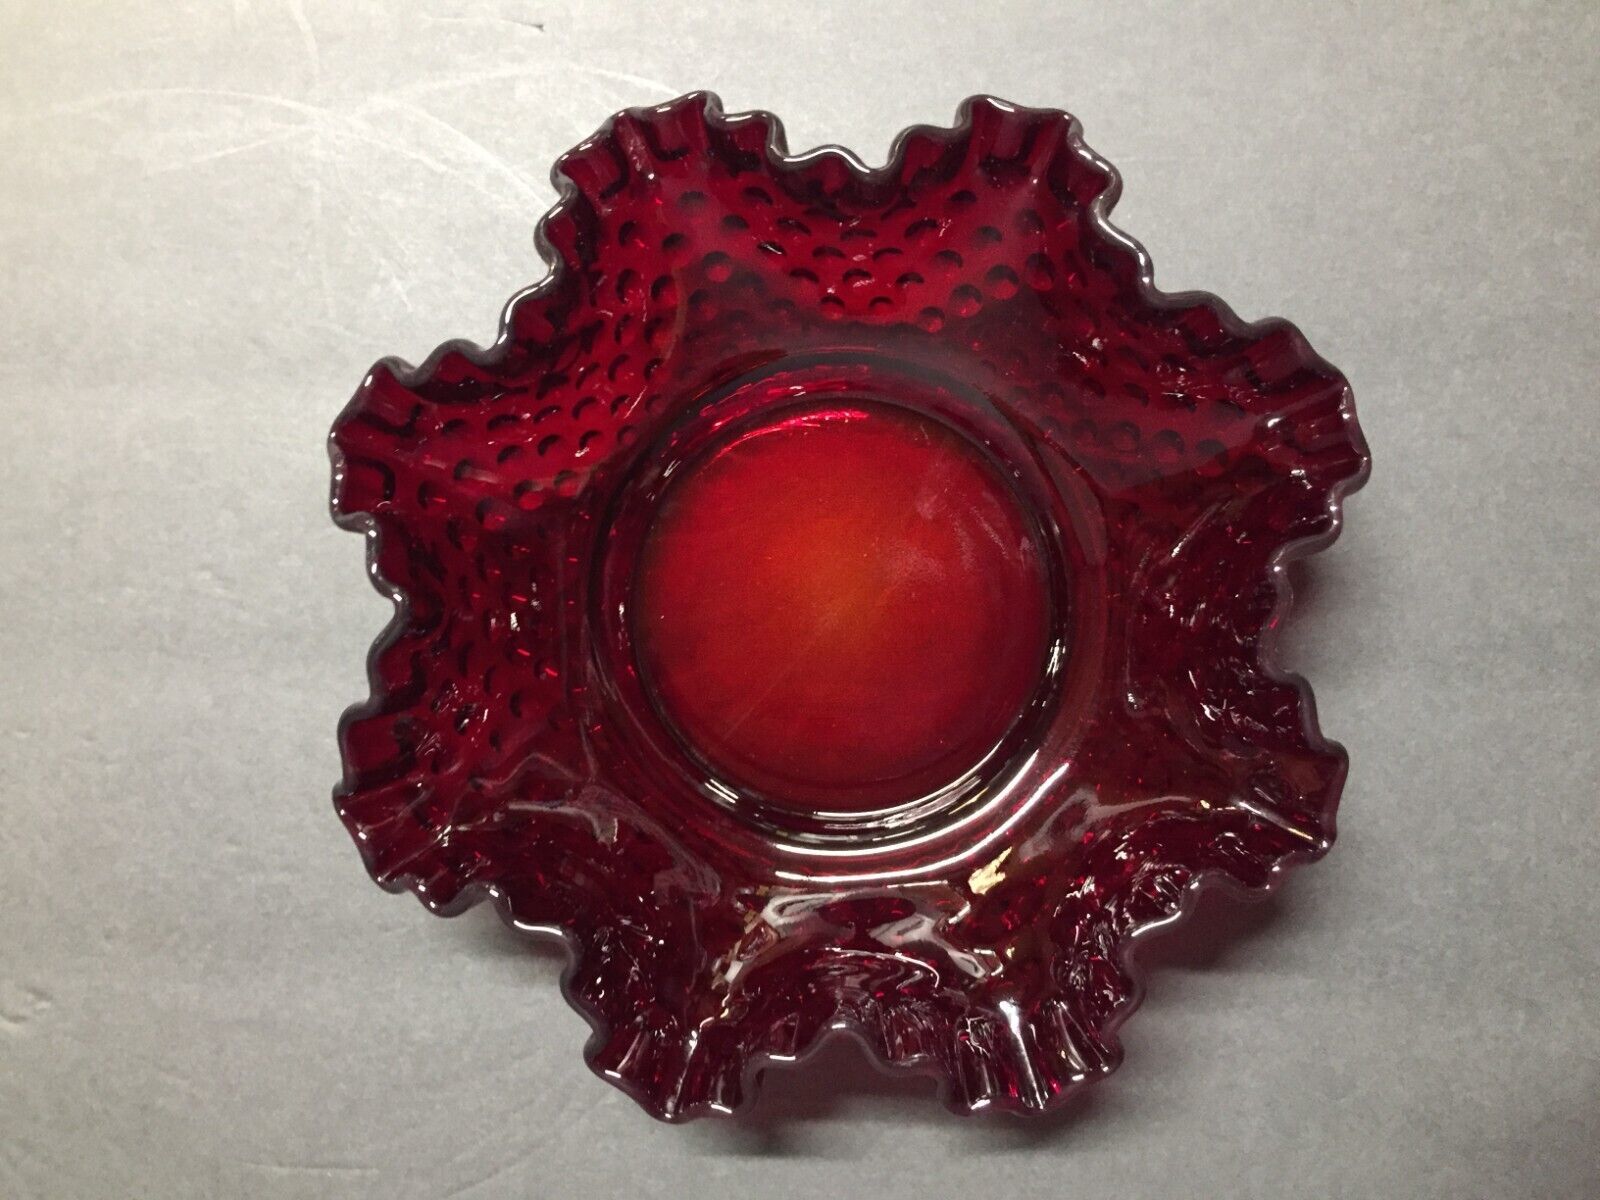 Vintage Fenton Ruby Red Candy or Nut Dish Bowl Ruffled Hobnail Crimped Cranberry - $21.30